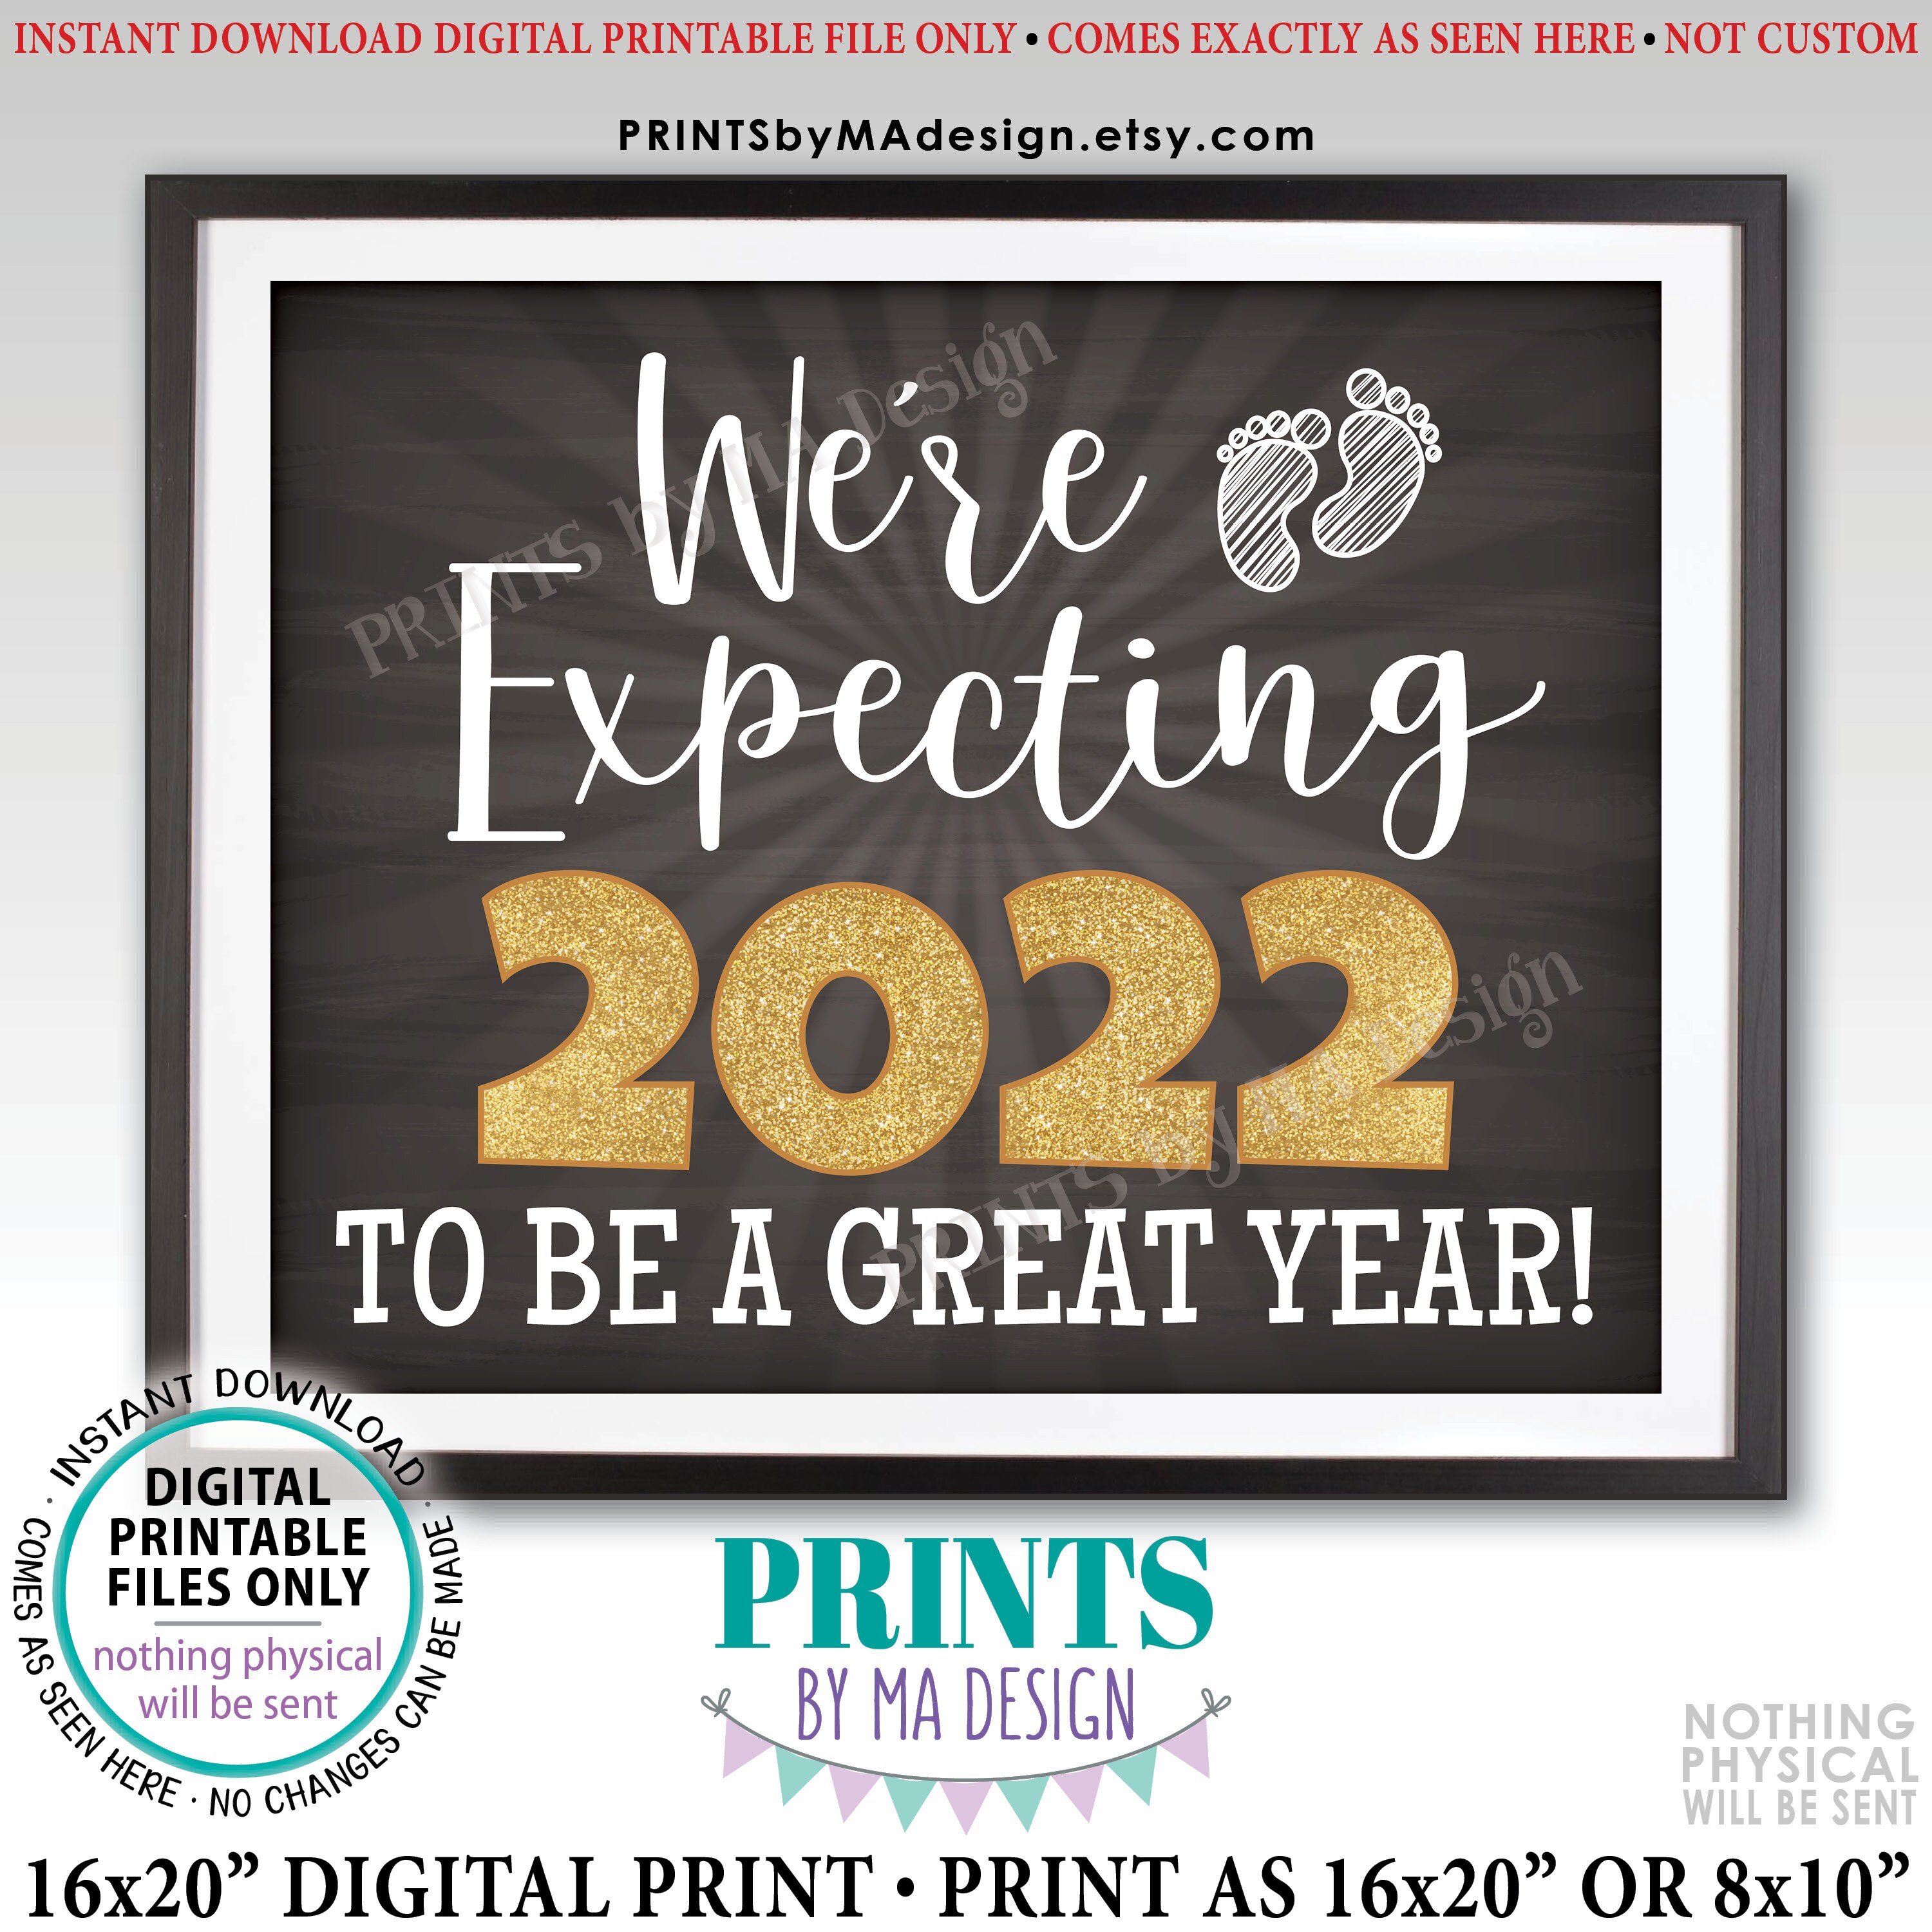 new-years-pregnancy-announcement-we-re-expecting-2022-to-be-a-great-year-sign-printable-16x20